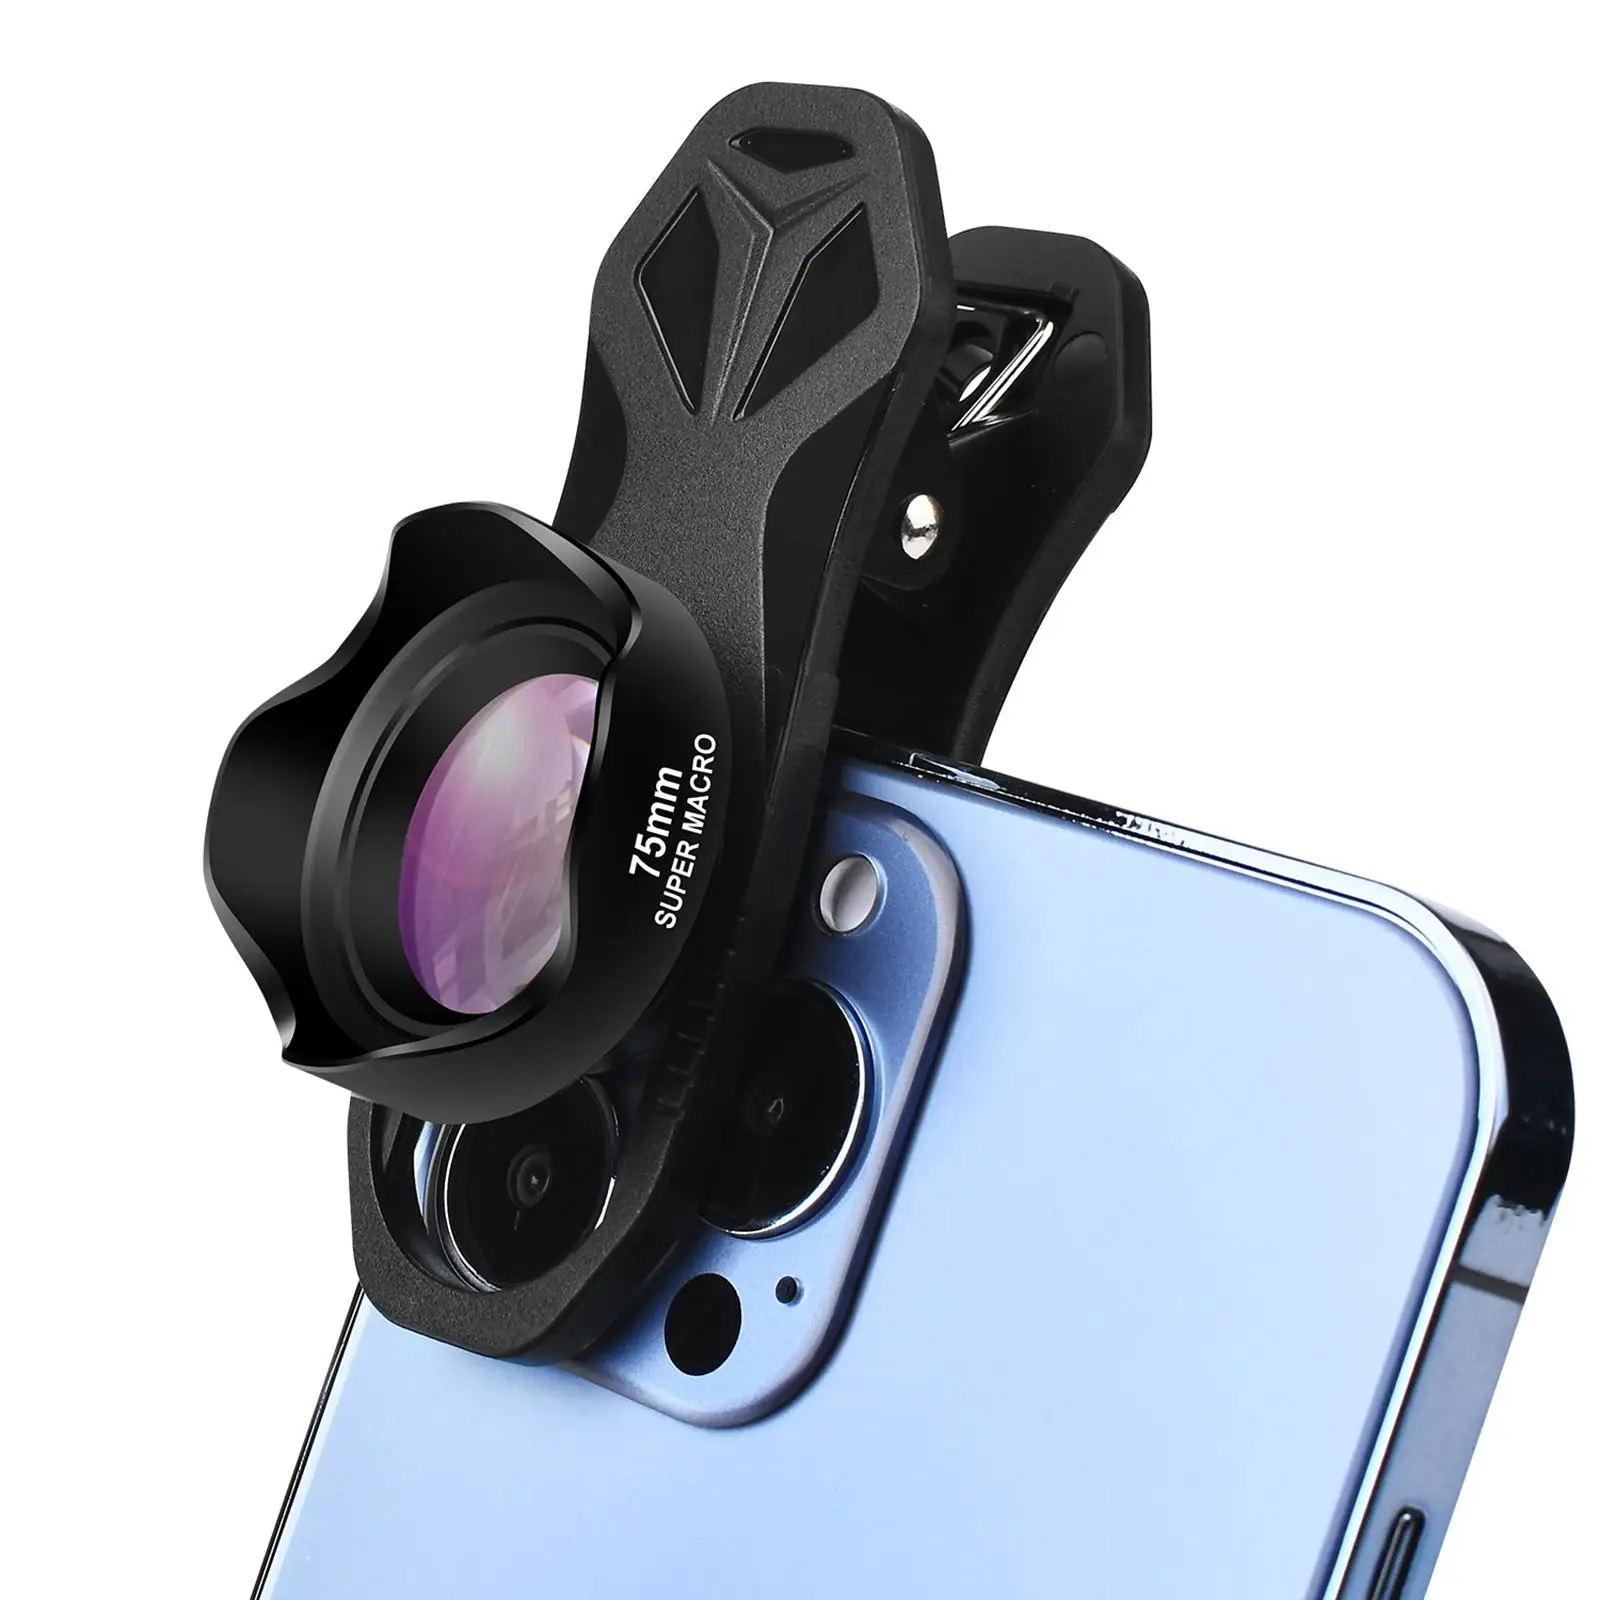 10x Macro Lens Camera 75mm HD Clip On Phone Lens for Most Smartphones Android iOS